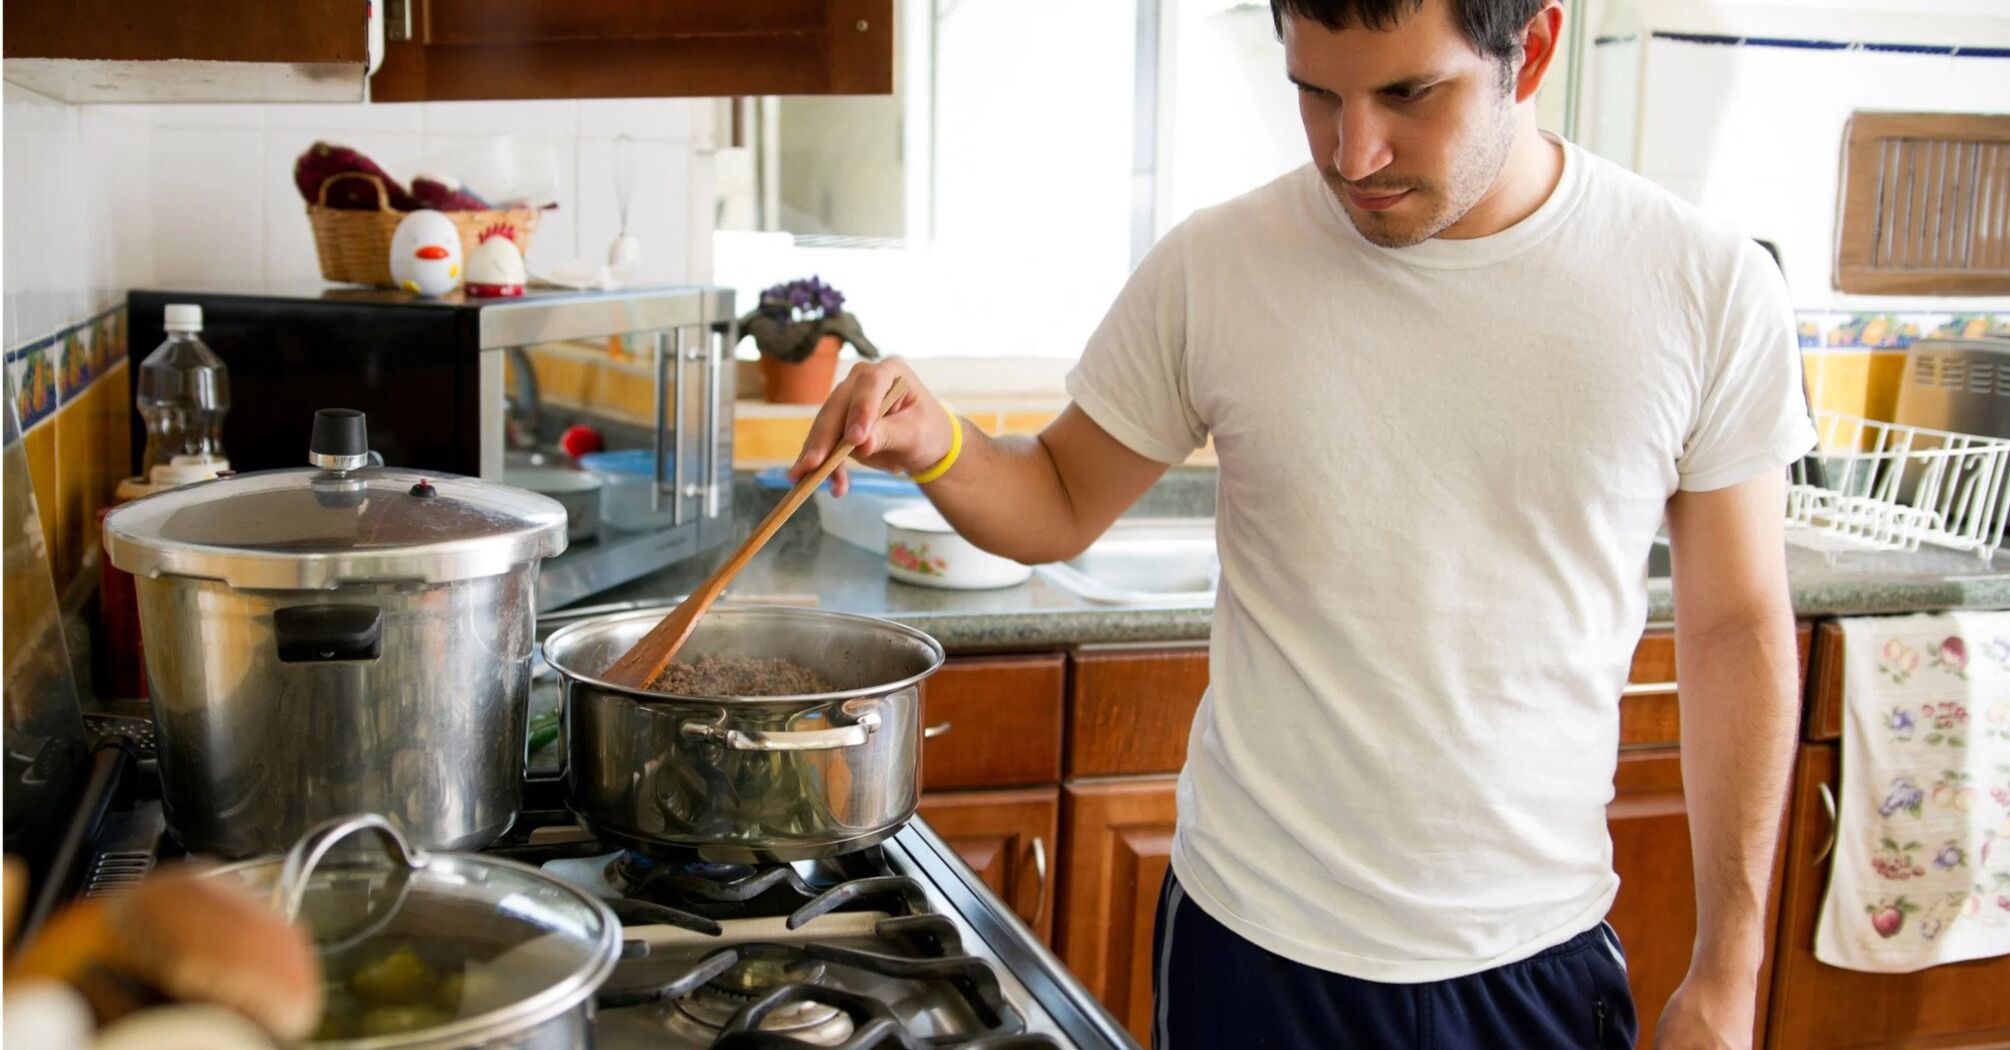 How to remove odors from cooking in the kitchen